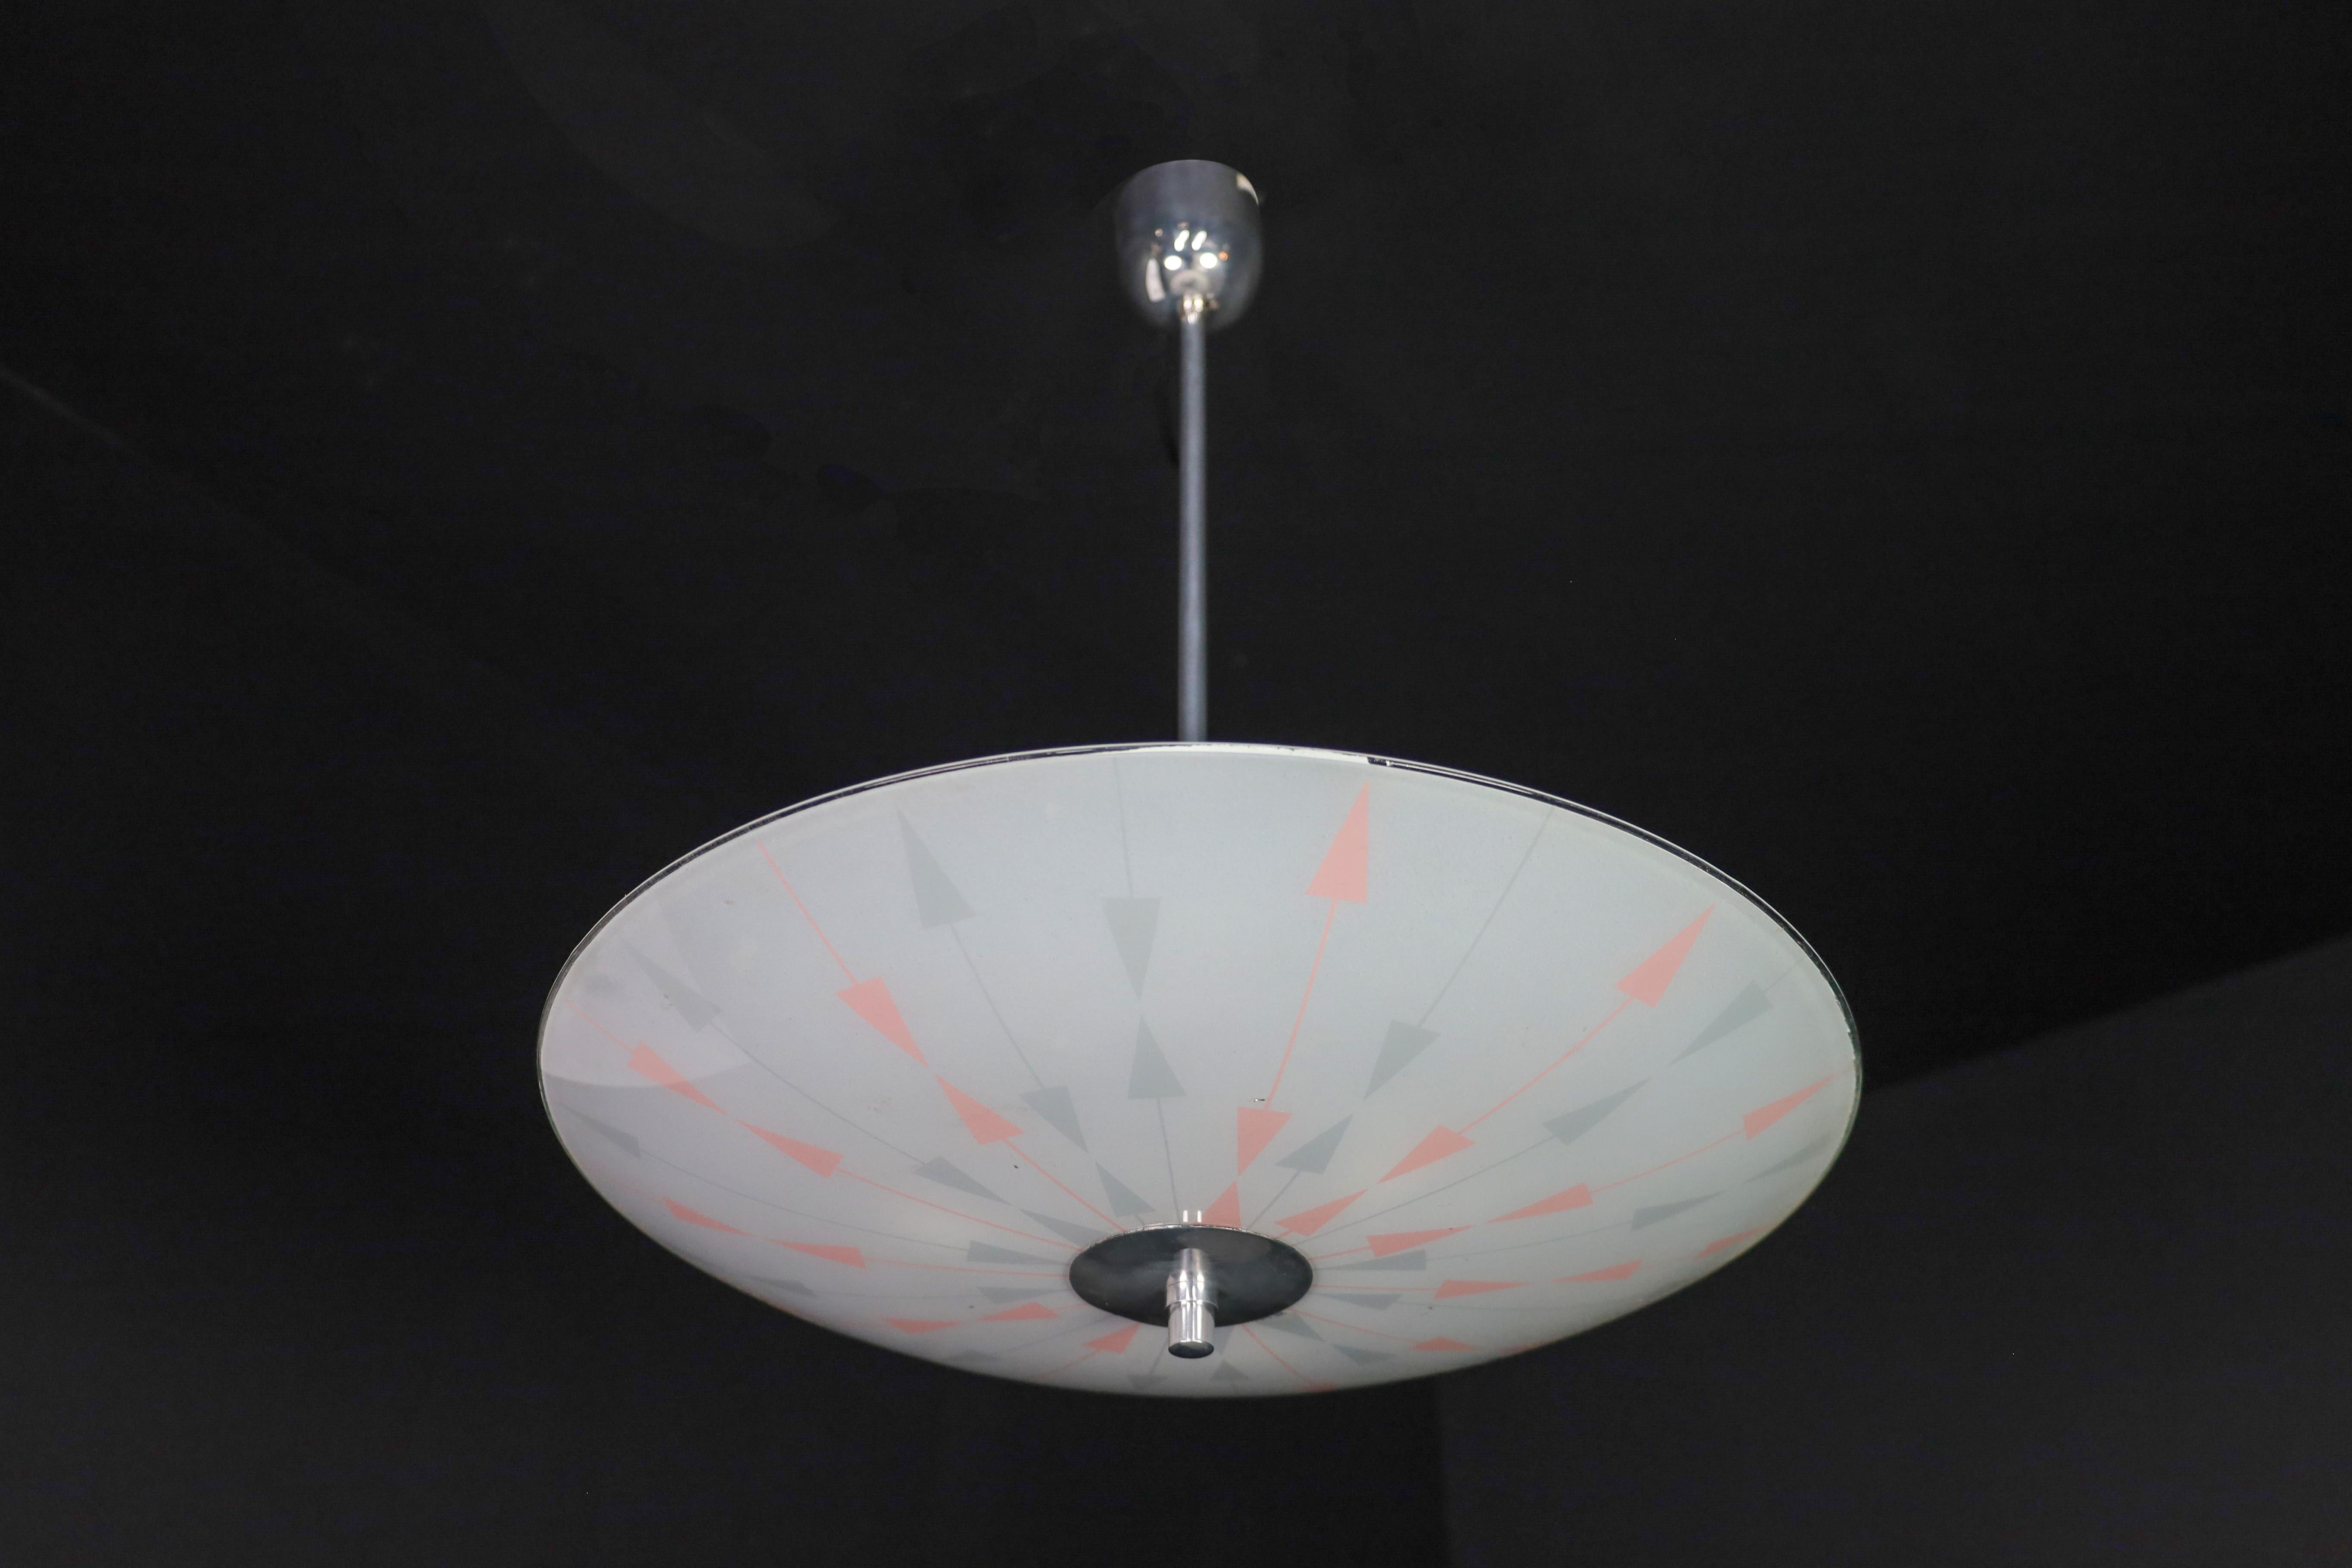 Mid-20th Century Mid-Century Glass Hanging Pendant Lamp Brussels World Expo 1958 (5116) For Sale